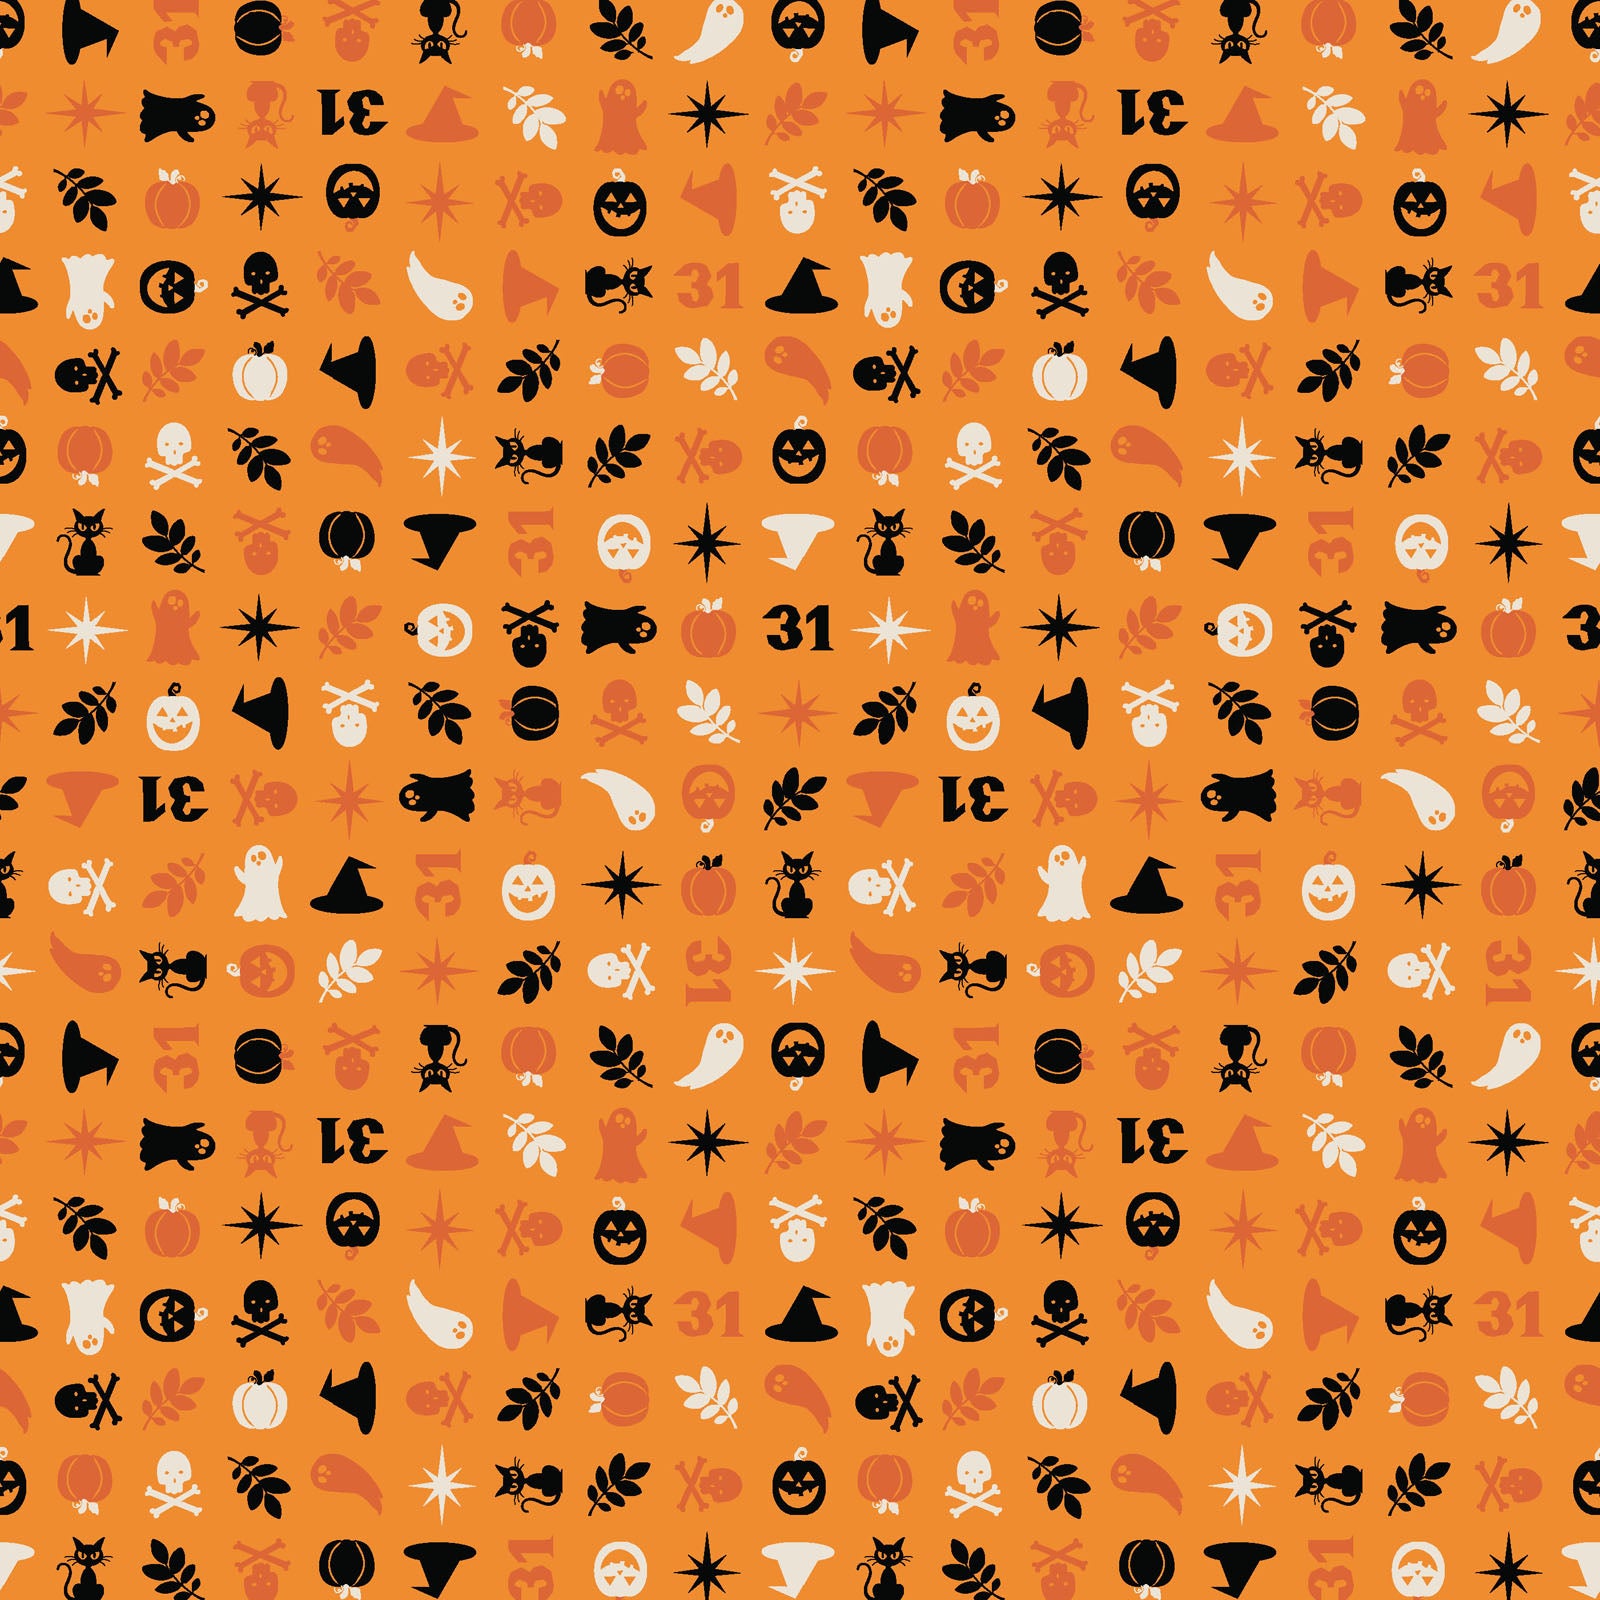 The Halloween Charms print in orange (MAS10573-O) from the Pumpkin and Potions line by Kimberbell for Maywood Studio features pumpkins, witch hats, ghosts, cats, spiders and more. Photo shows details of the designs.